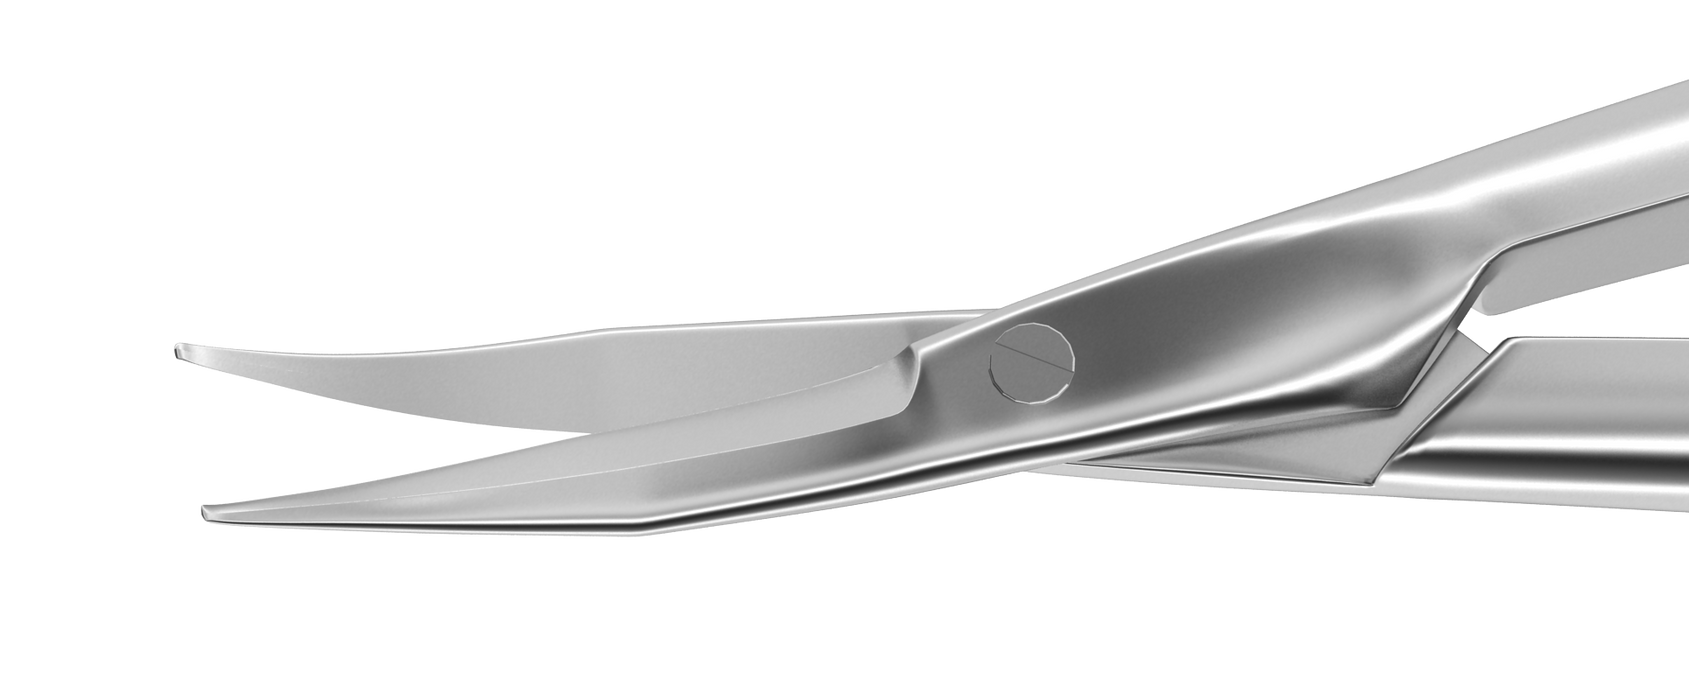 032R 11-048S Westcott Curved Tenotomy Scissors, Right, Blunt Tips, 15.00 mm Blades, Length 116 mm, Stainless Steel